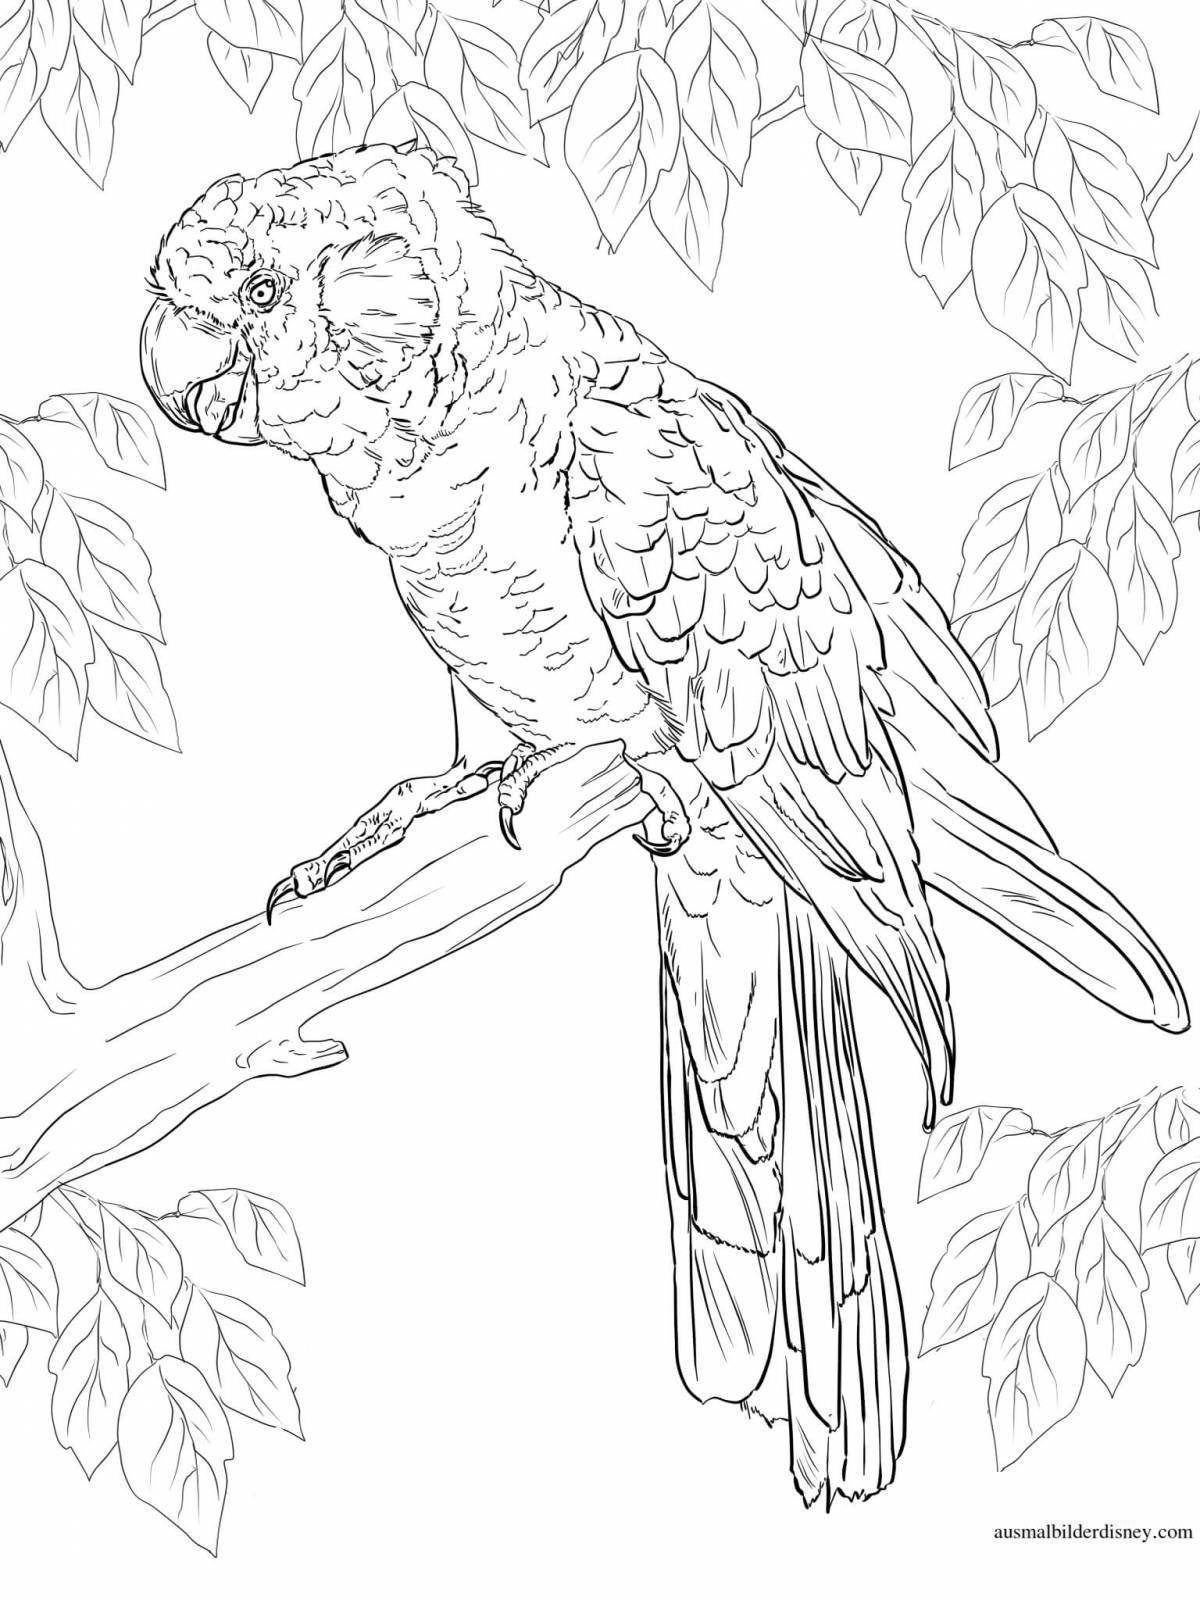 Outstanding cockatoo coloring page